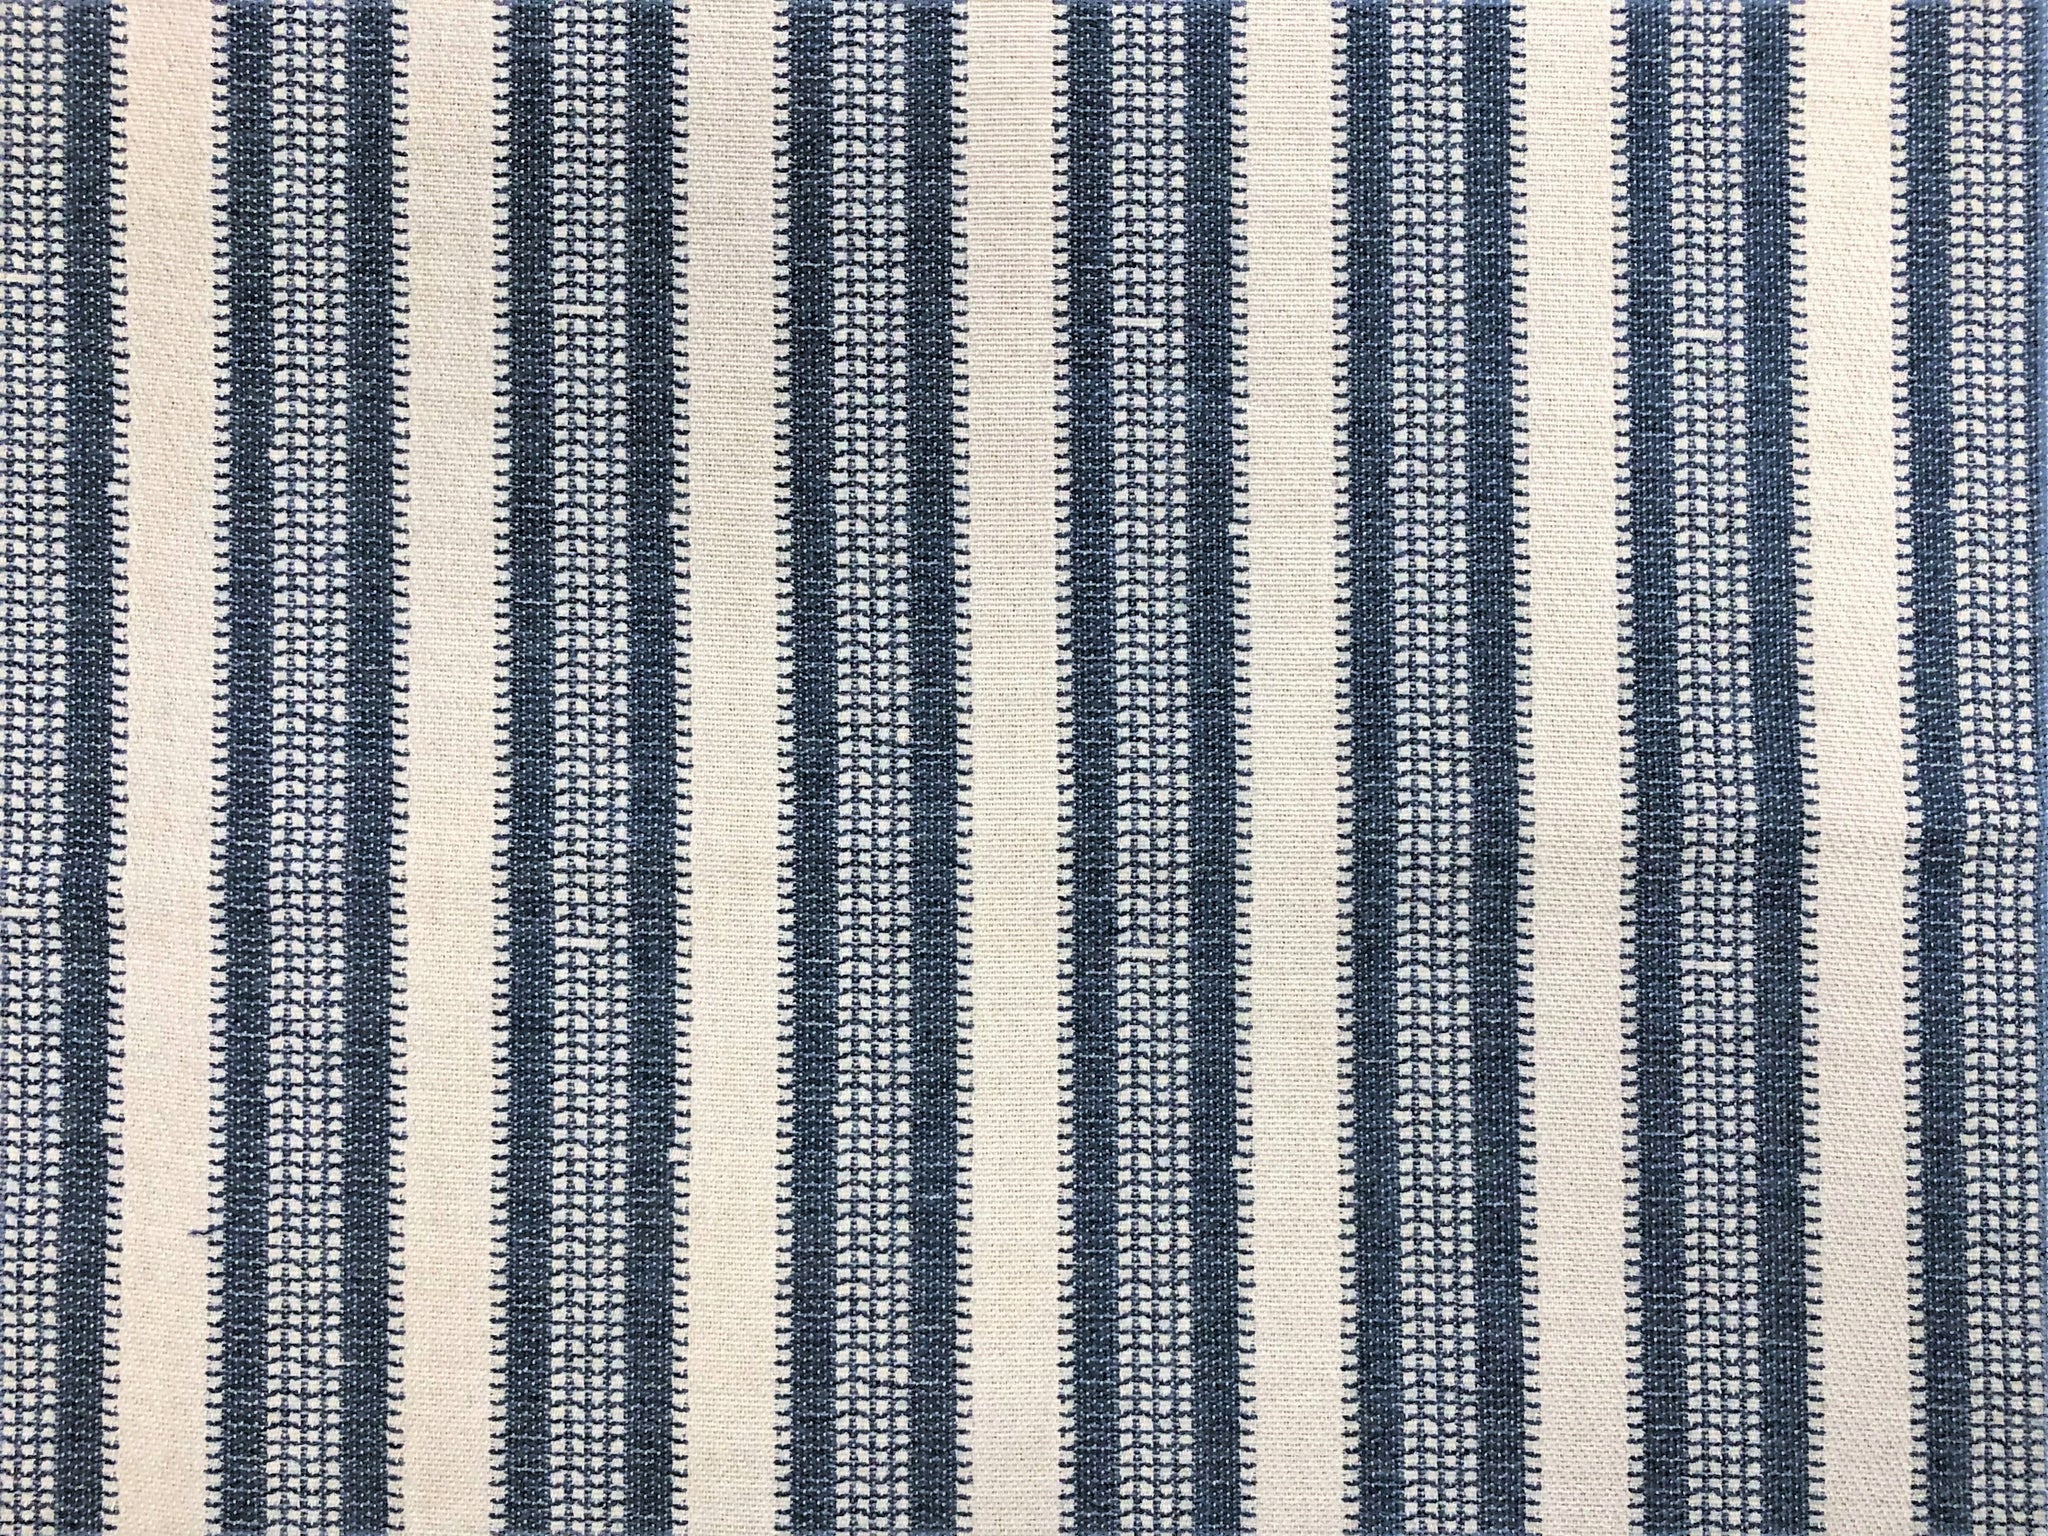 6045011 ESSEX FRENCH BLUE Ticking Stripe Upholstery And Drapery Fabric